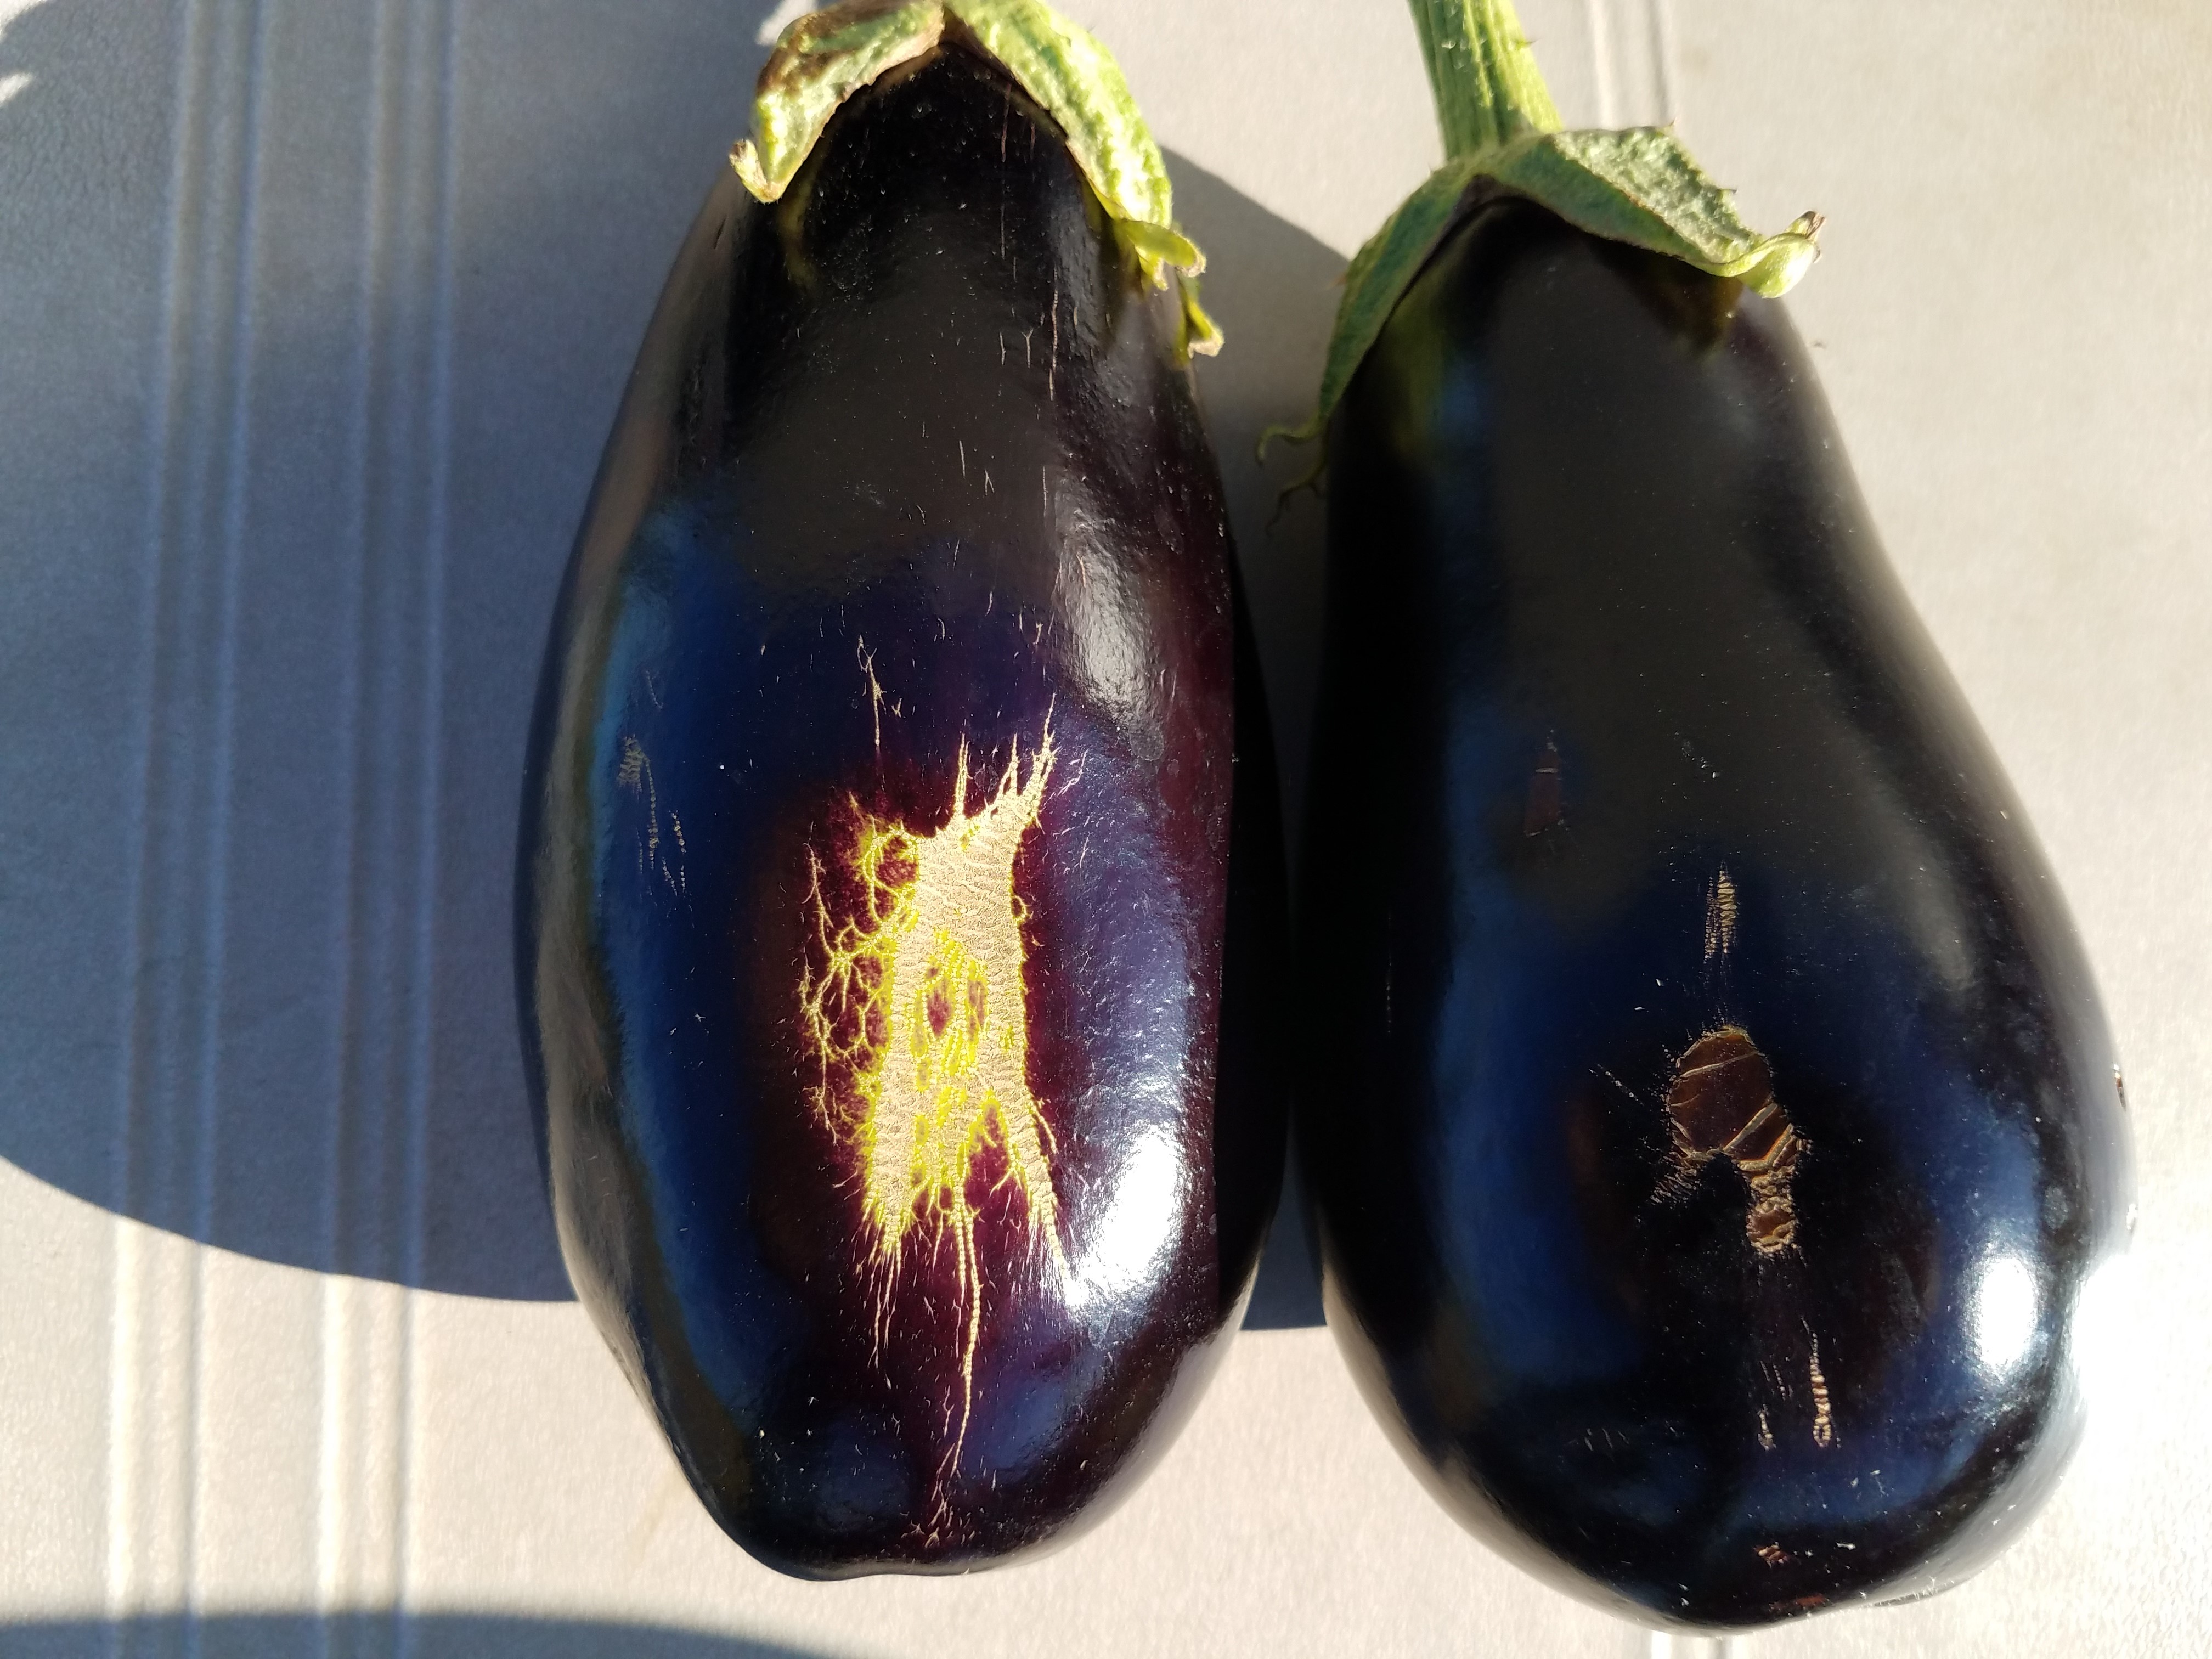 Eggplant with blemishes